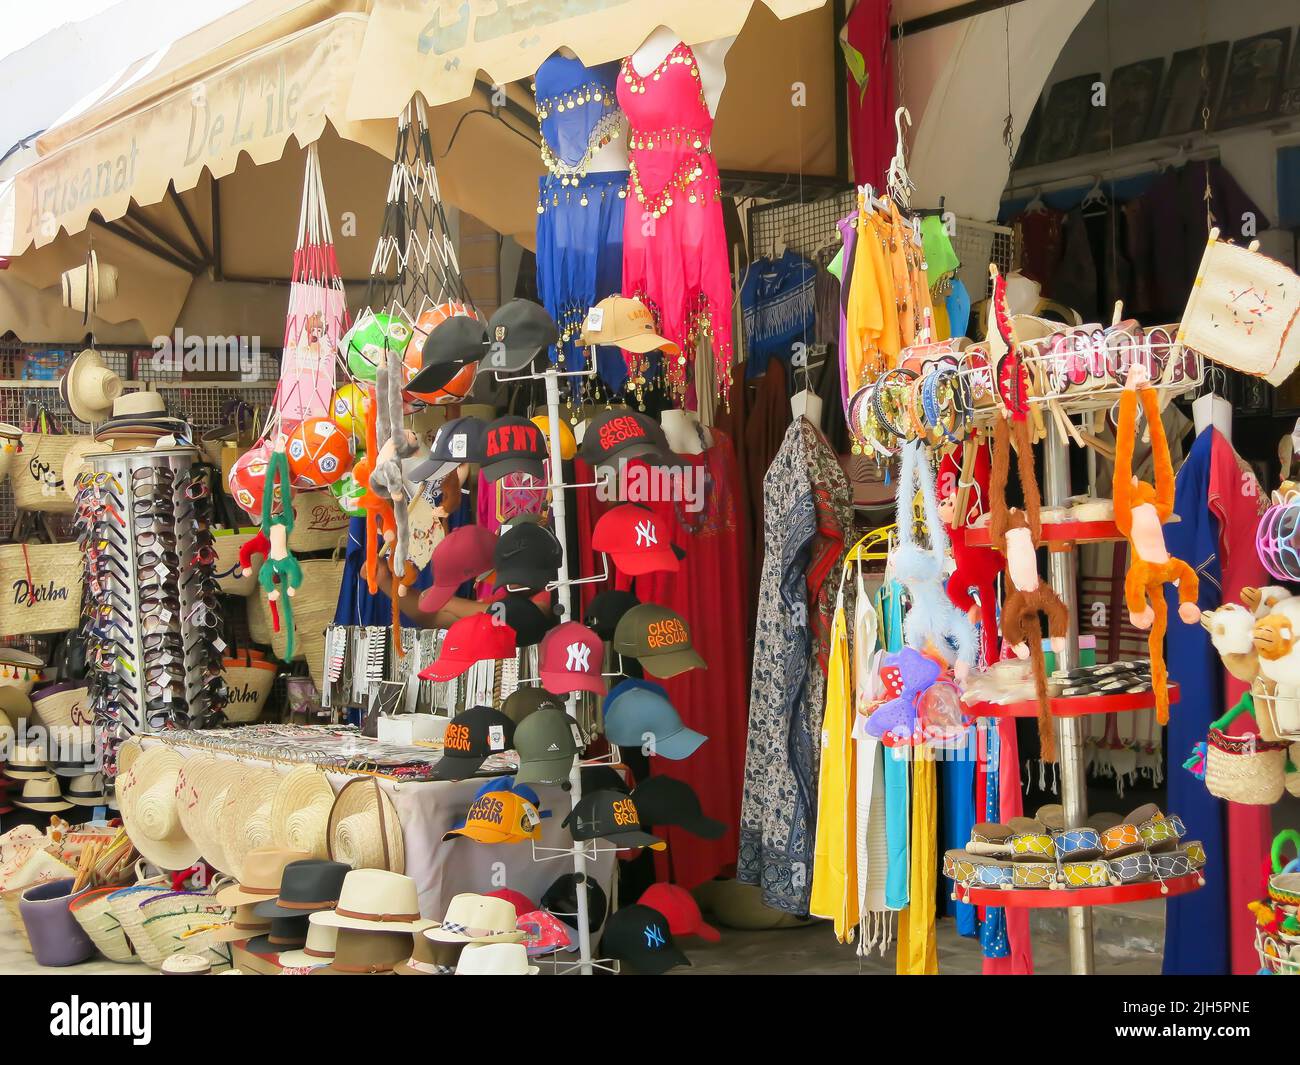 Street Scene - Open Store Fronts with Merchandize on Display Stock Photo